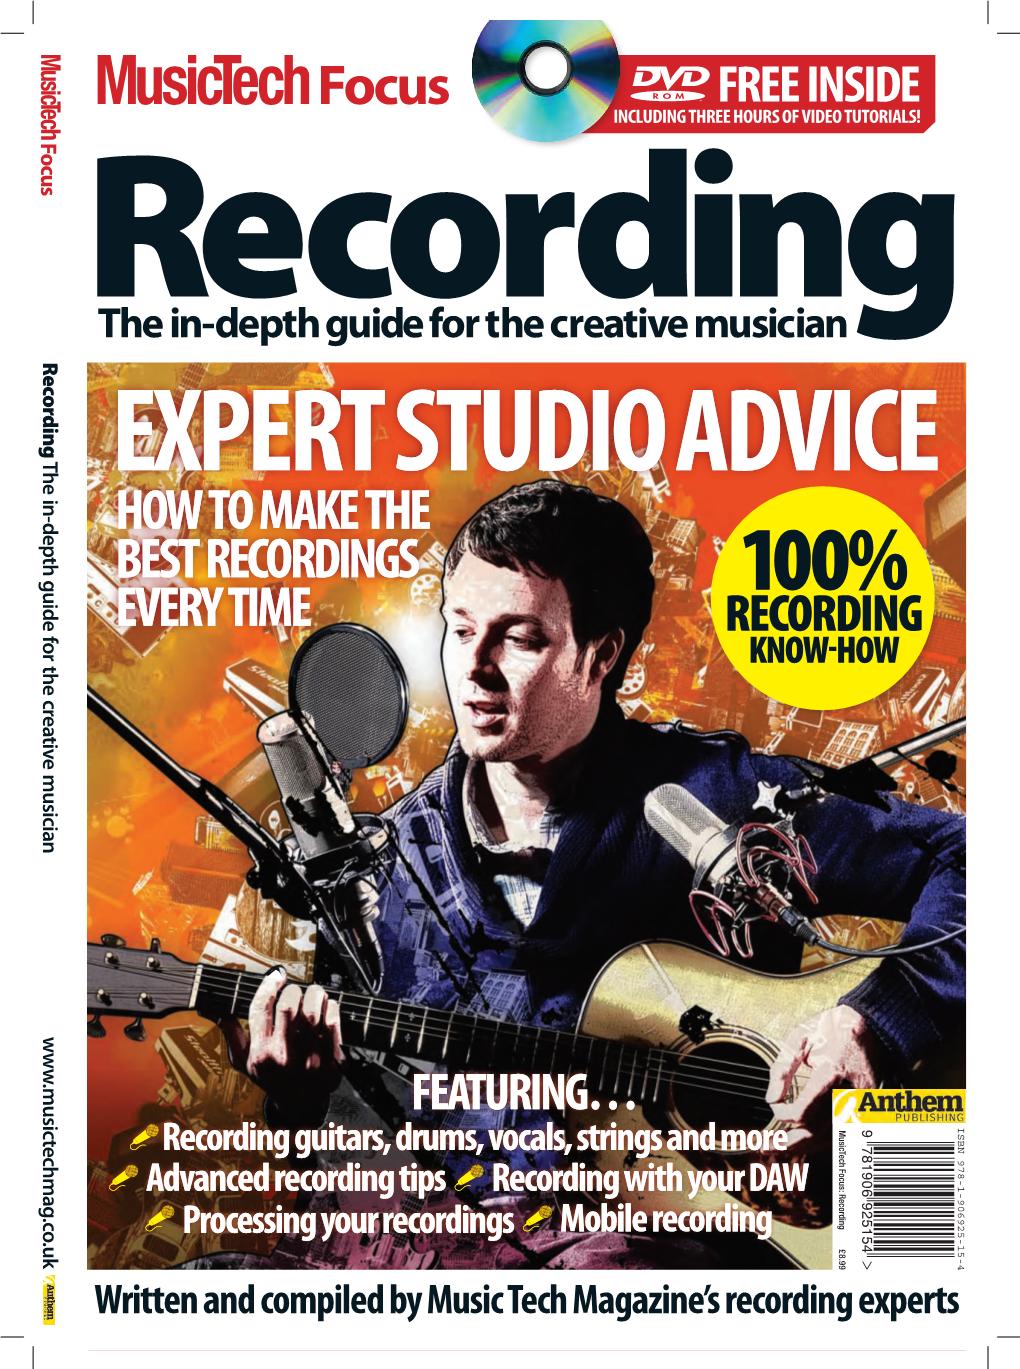 How to Make the Best Recordings Every Time How to Make the Best Recordings Every Time How to Make the Best Recordings Every Time